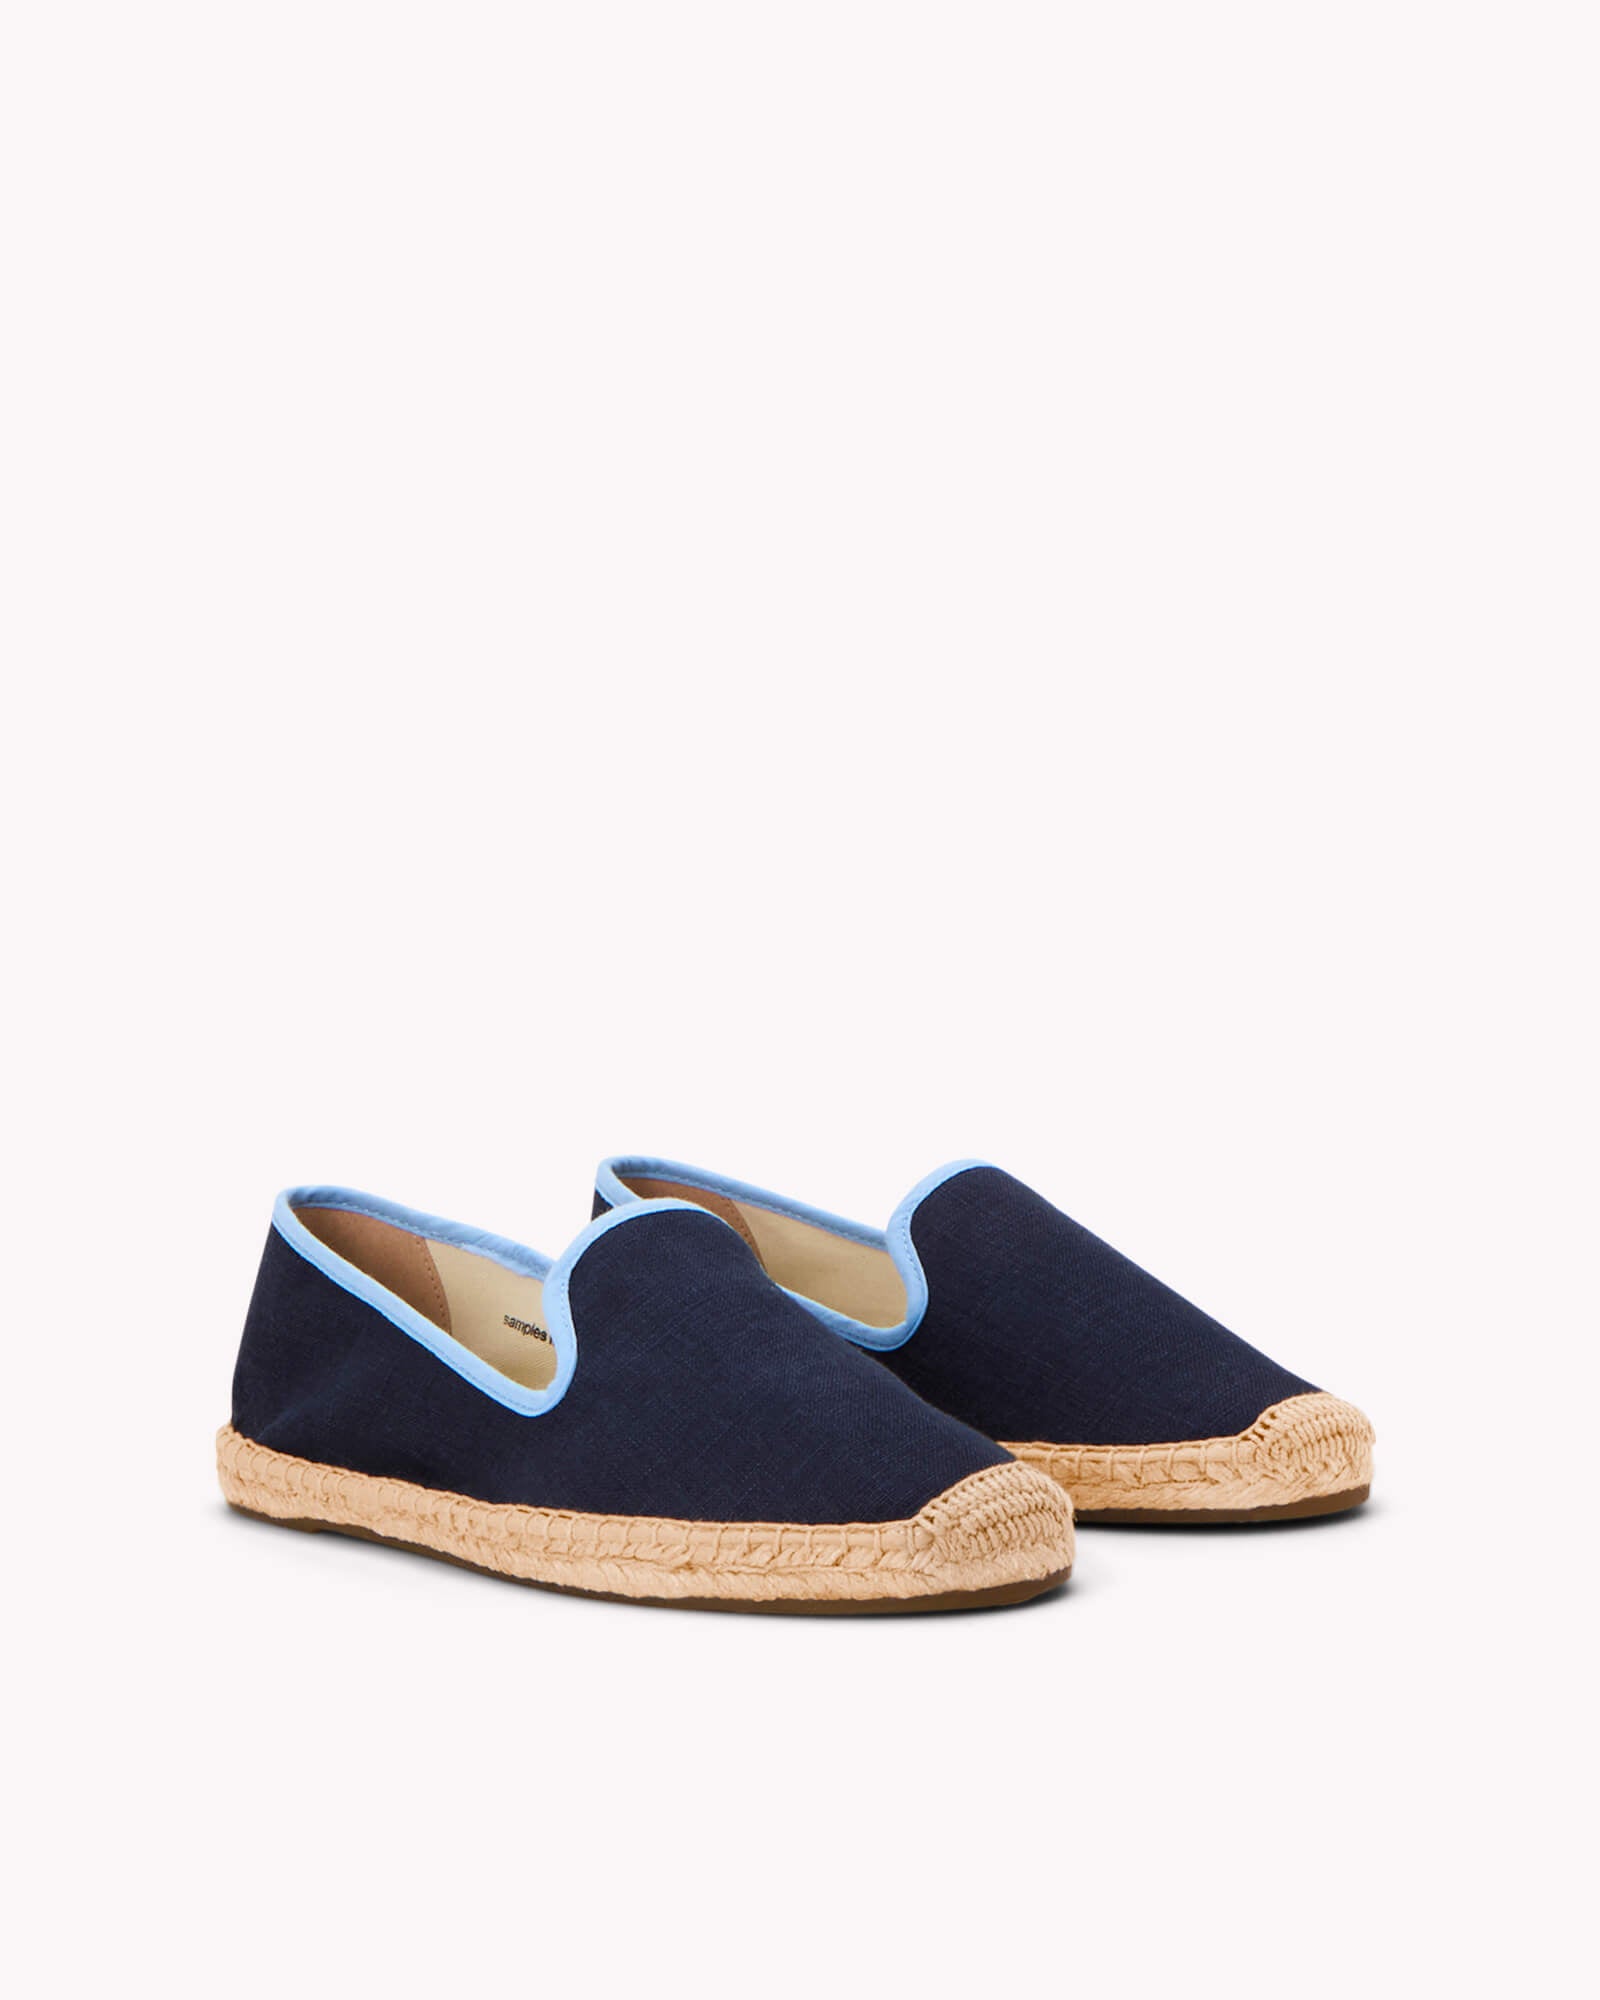 Women's navy espadrille shoes with light blue piping on gray background